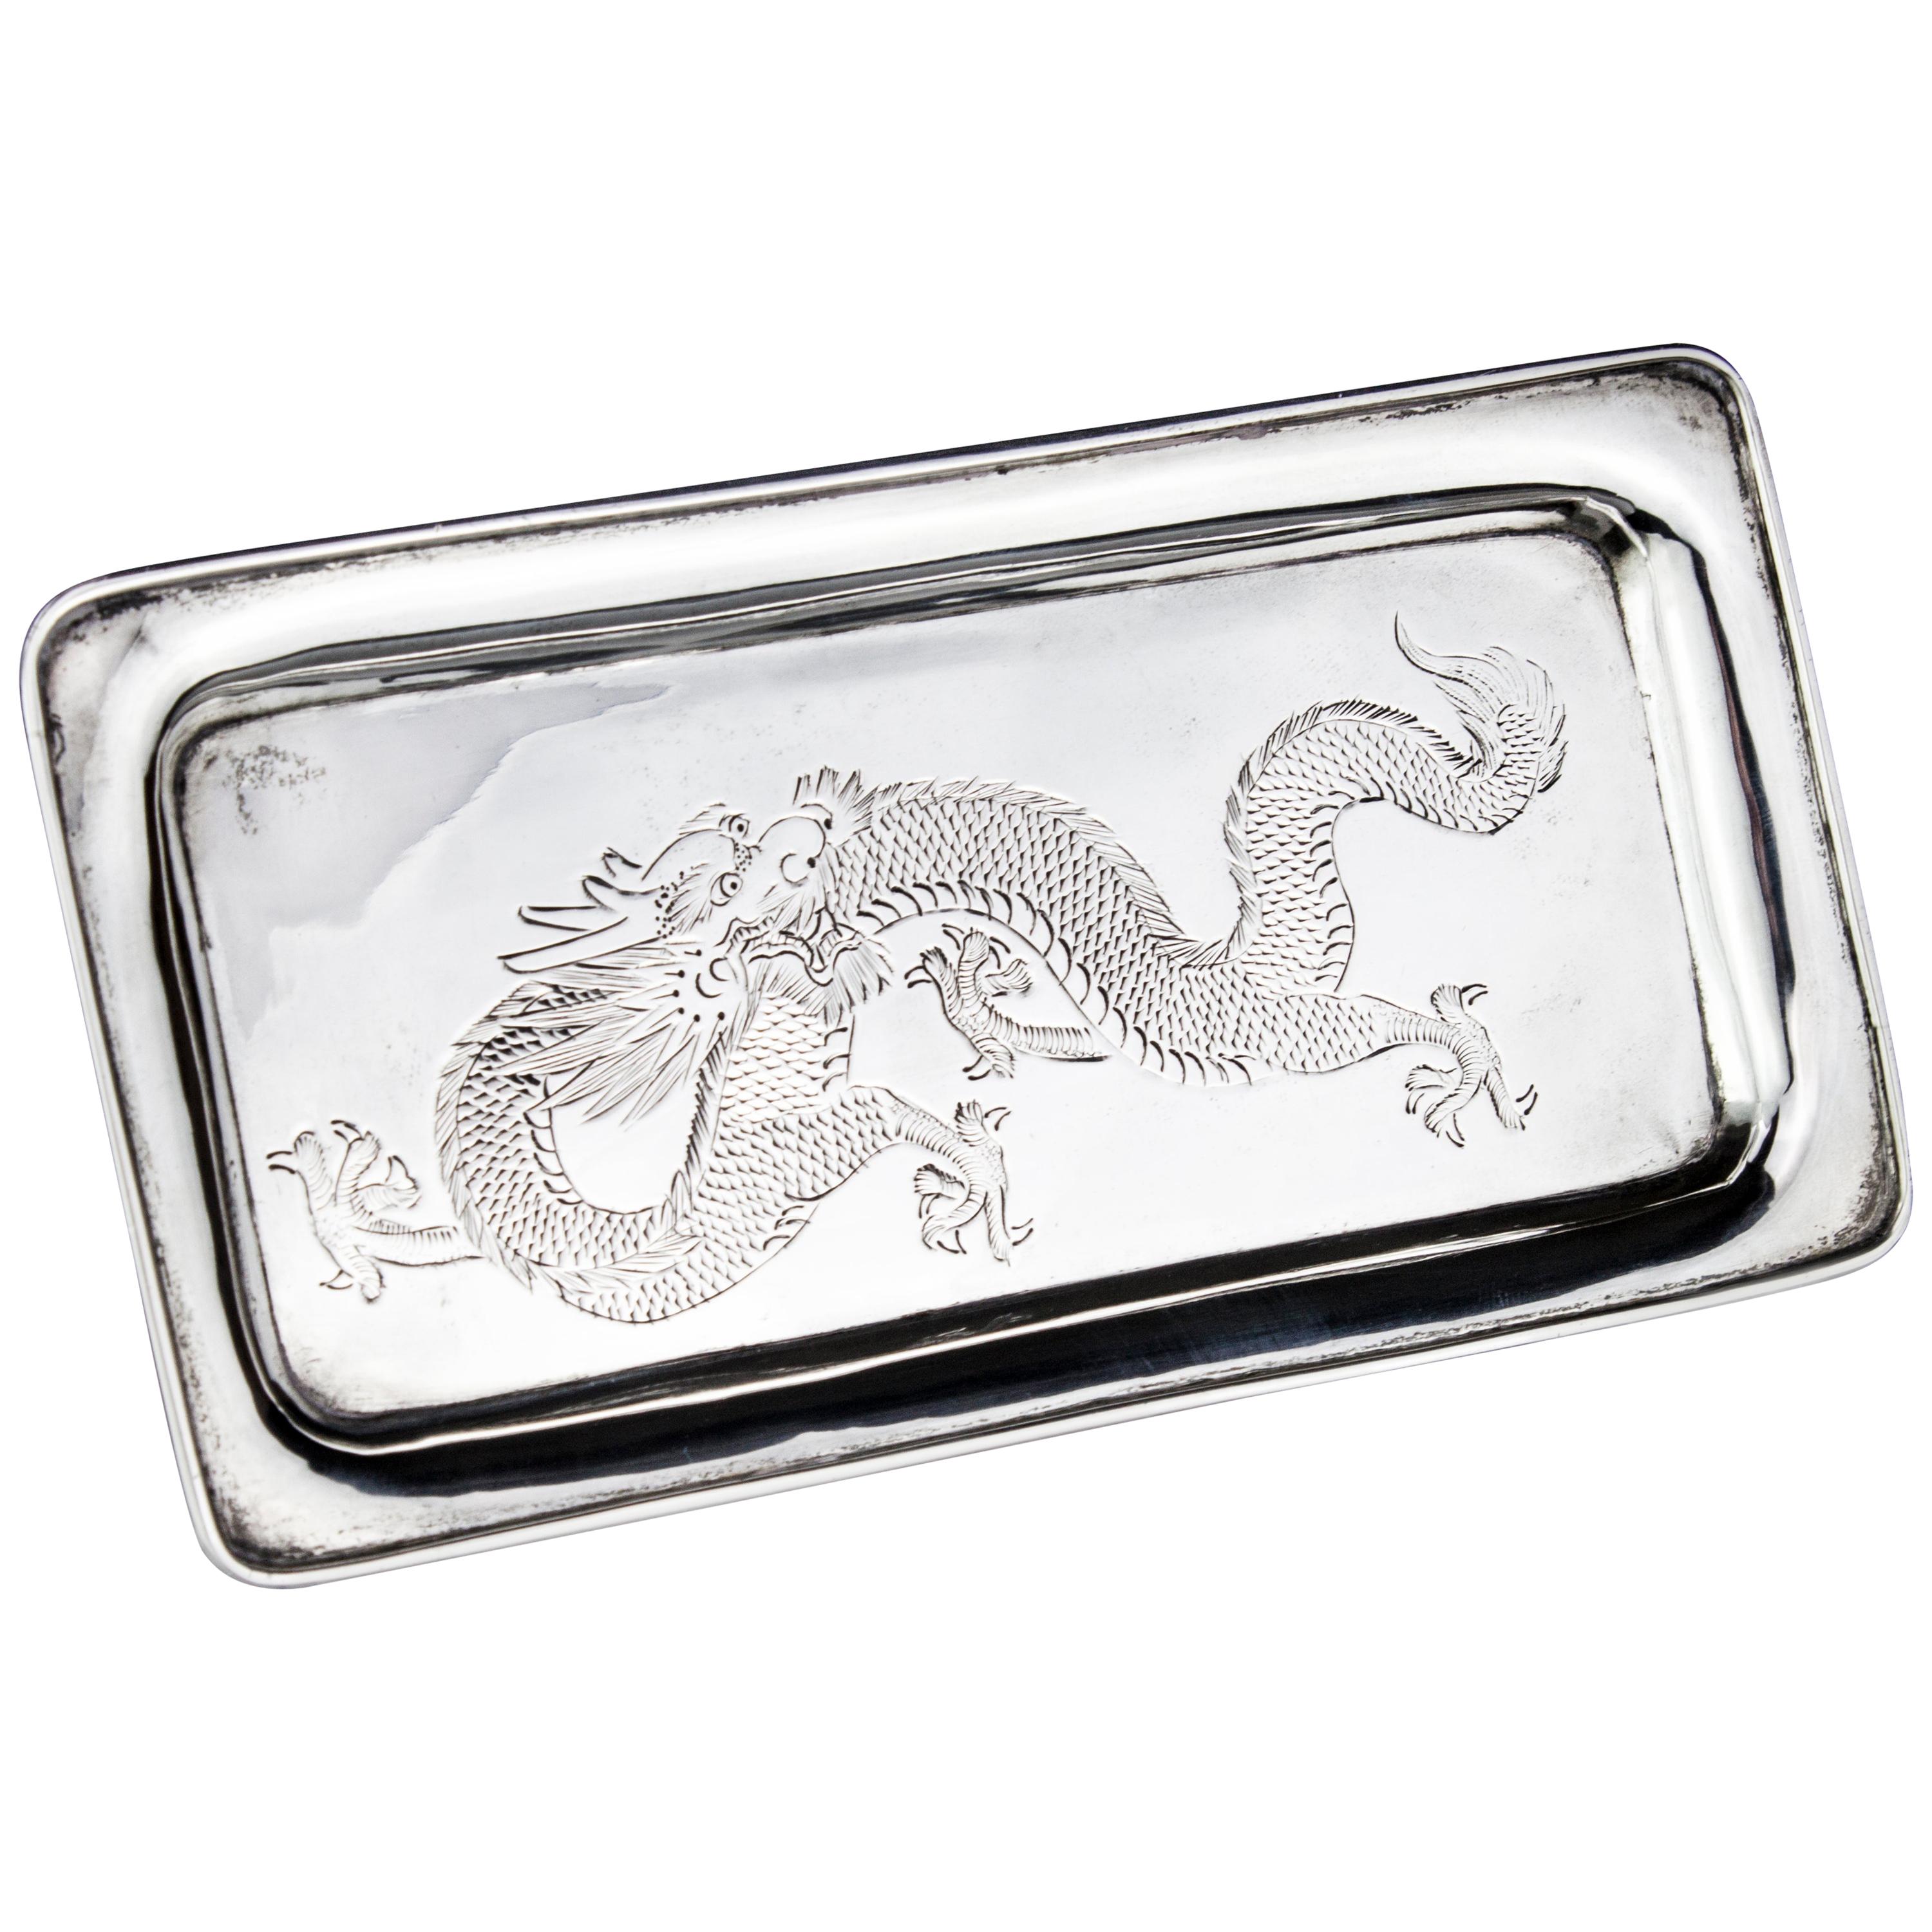 Antique Chinese Elongated Tray with Dragon Scenery